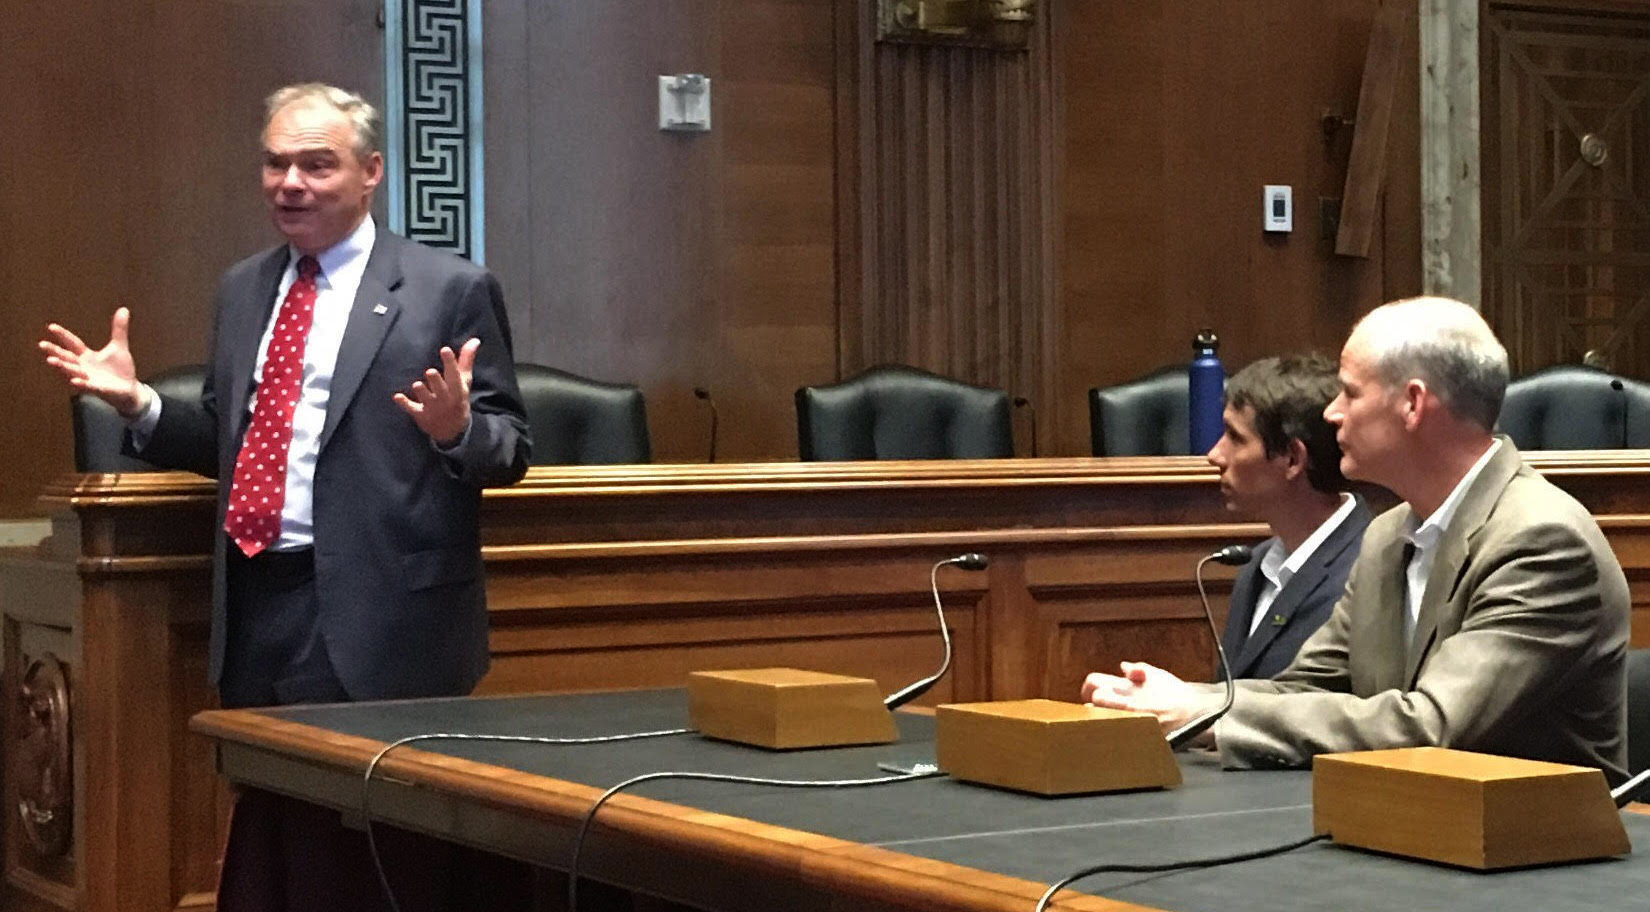 Senator Tim Kaine (D-Virginia) makes an impromptu speech at a Congressional briefing at the end of the day. Alex Honnold and Mike Gauthier, Yosemite National Park's Chief of Staff, look on. [Photo] Derek Franz